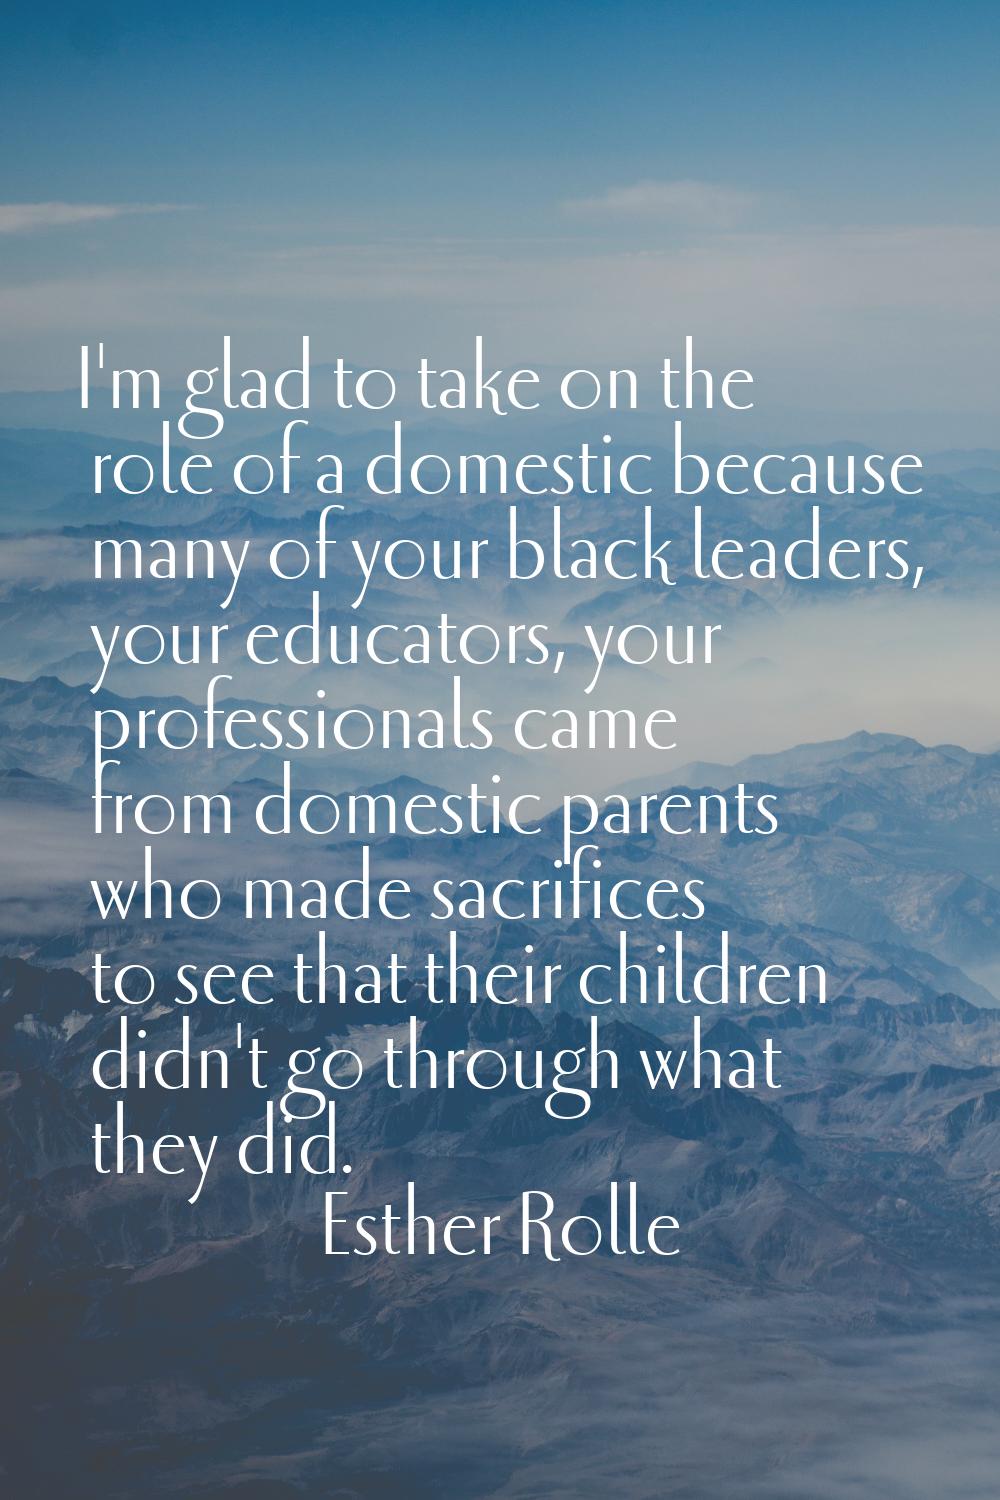 I'm glad to take on the role of a domestic because many of your black leaders, your educators, your